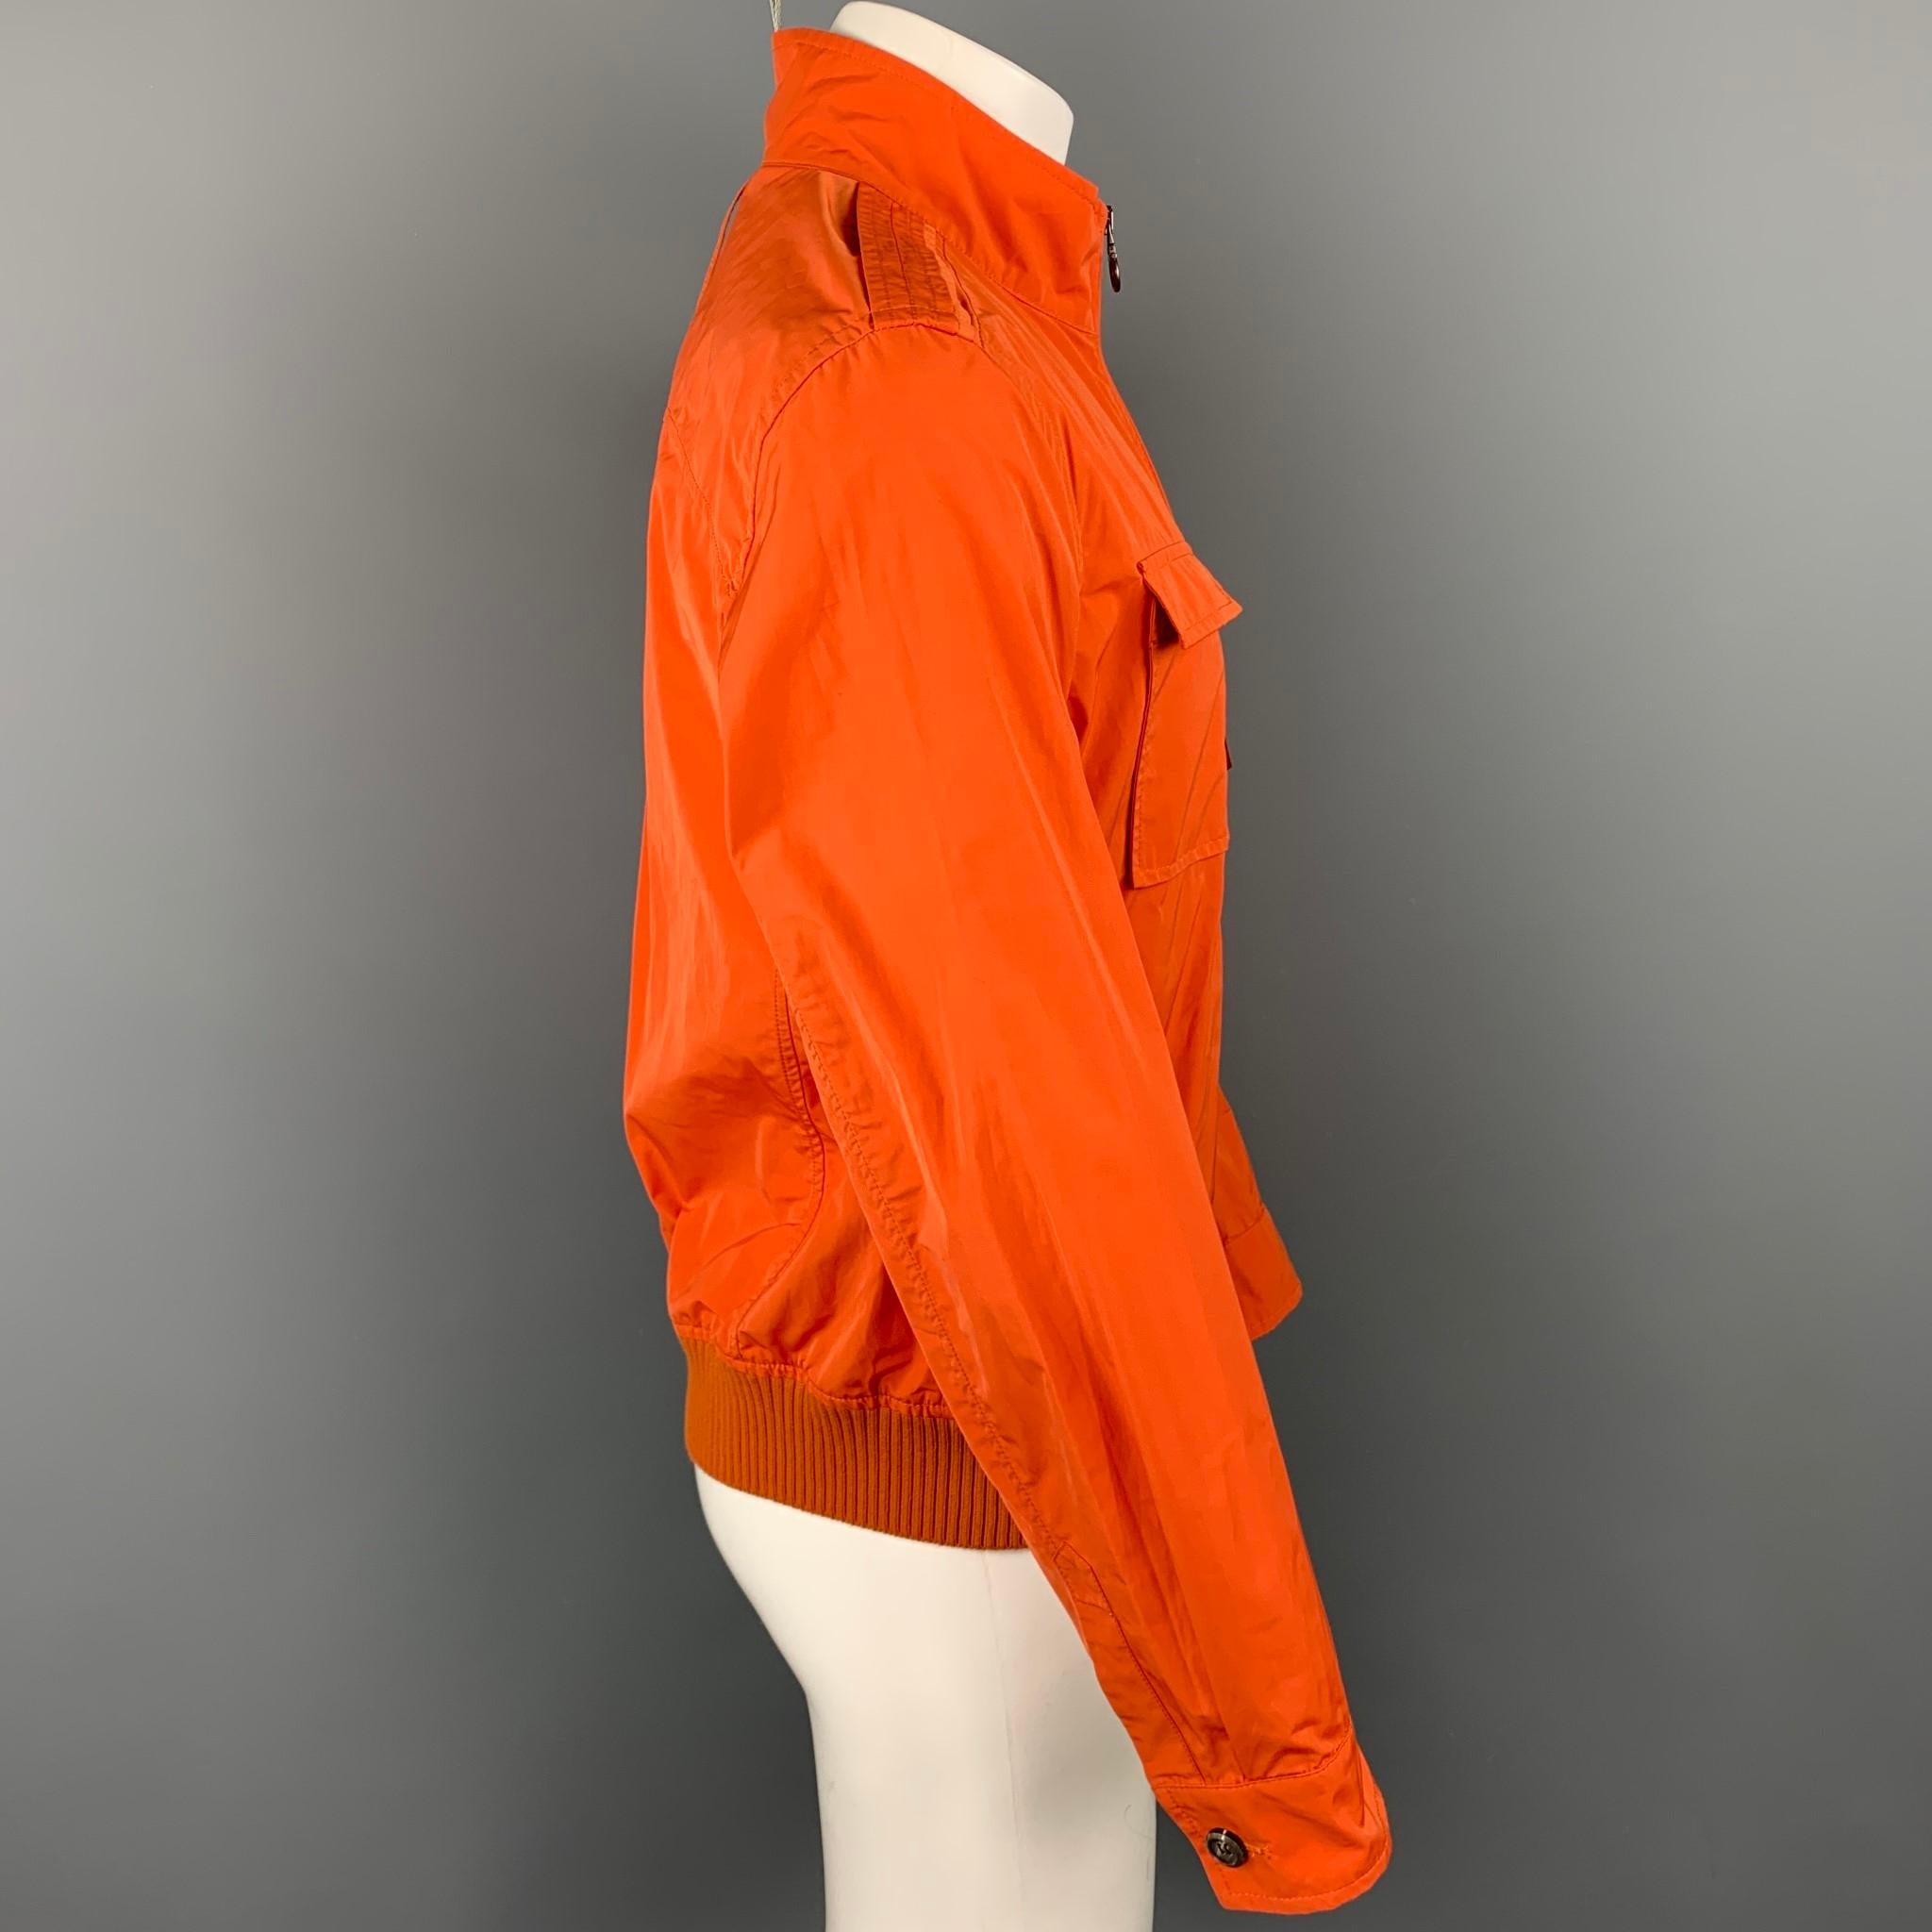 SALVATORE FERRAGAMO jacket comes in a orange polyester / cotton featuring patch pockets, ribbed hem, shoulder straps, and a full zip closure. 

New With Tags.
Marked: 50

Measurements:

Shoulder: 18.5 in.
Chest: 40 in.
Sleeve: 26 in.
Length: 25 in. 